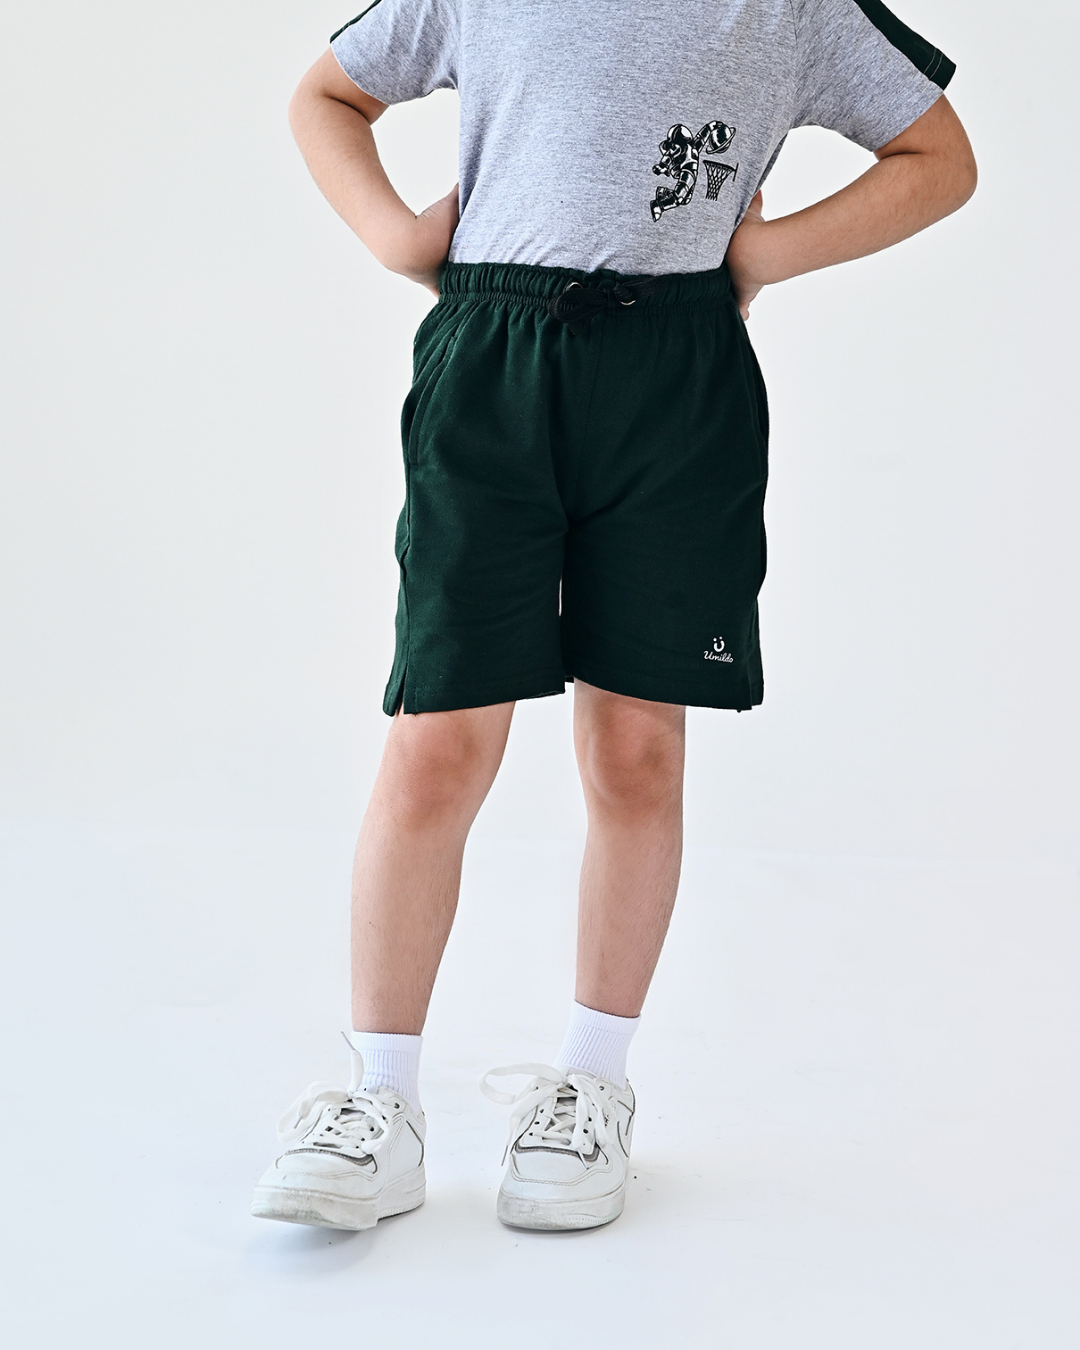 SOLID EMERALD COTTON SHORTS